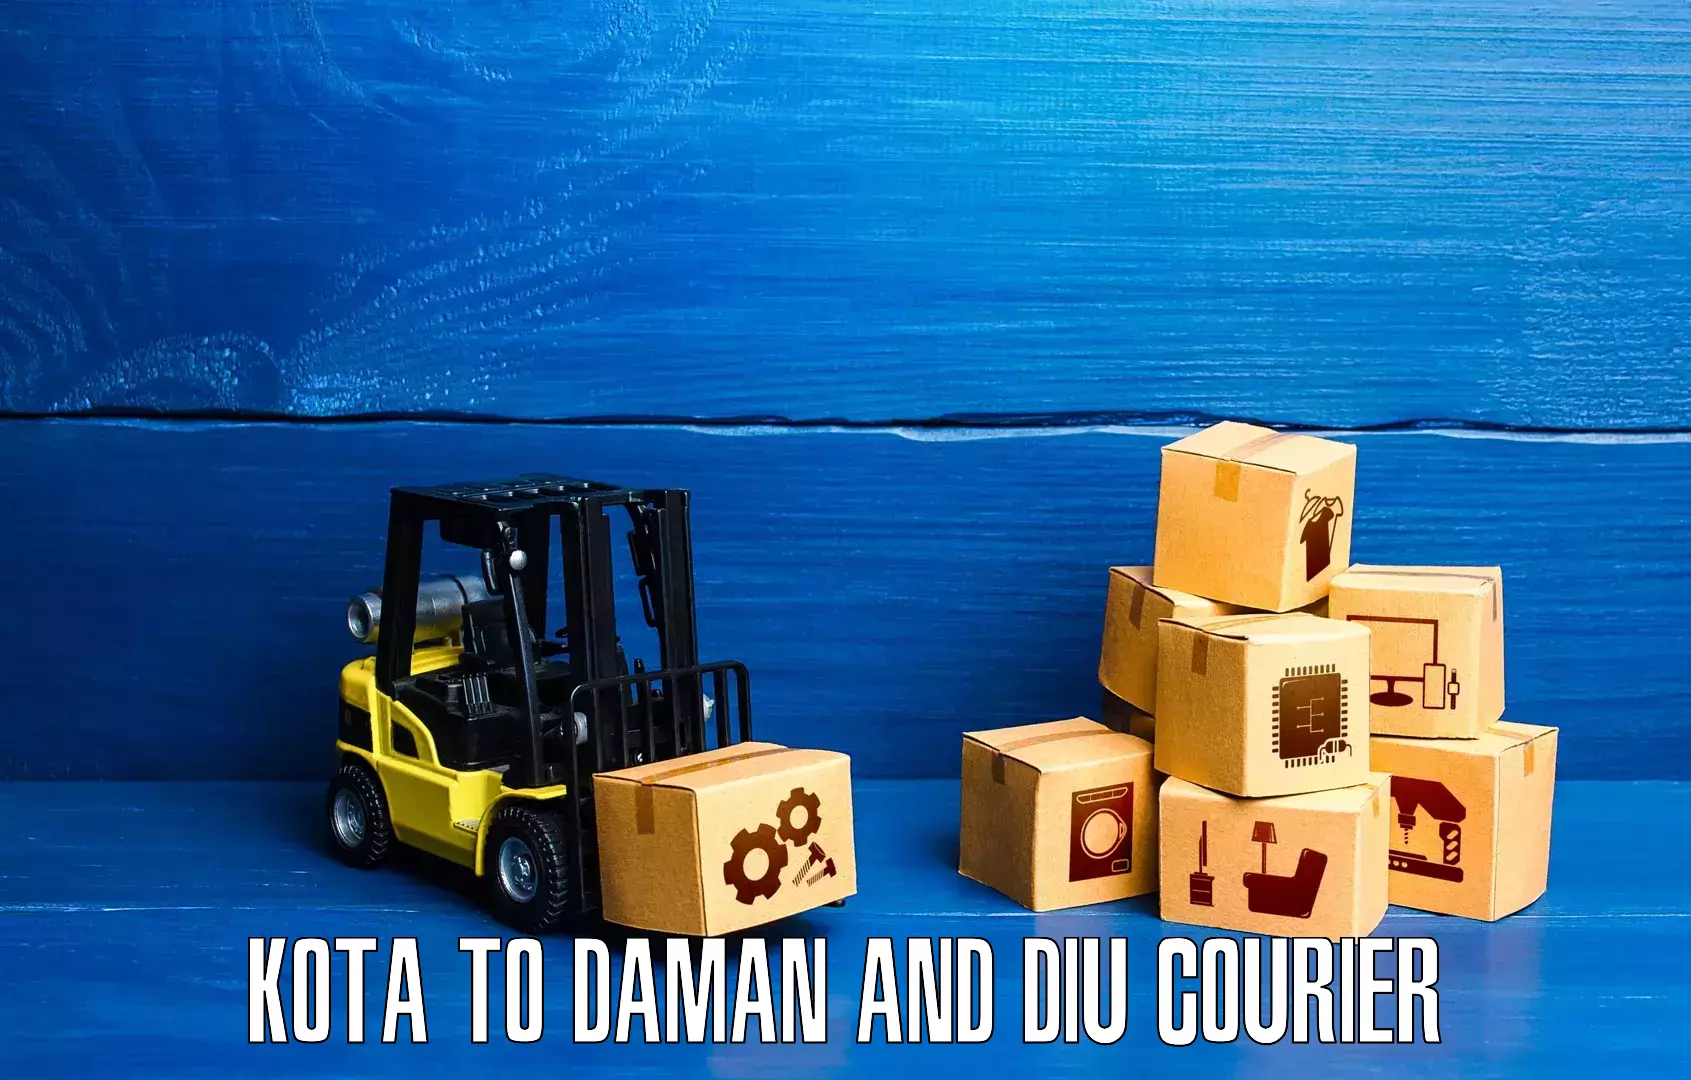 Global courier networks Kota to Daman and Diu